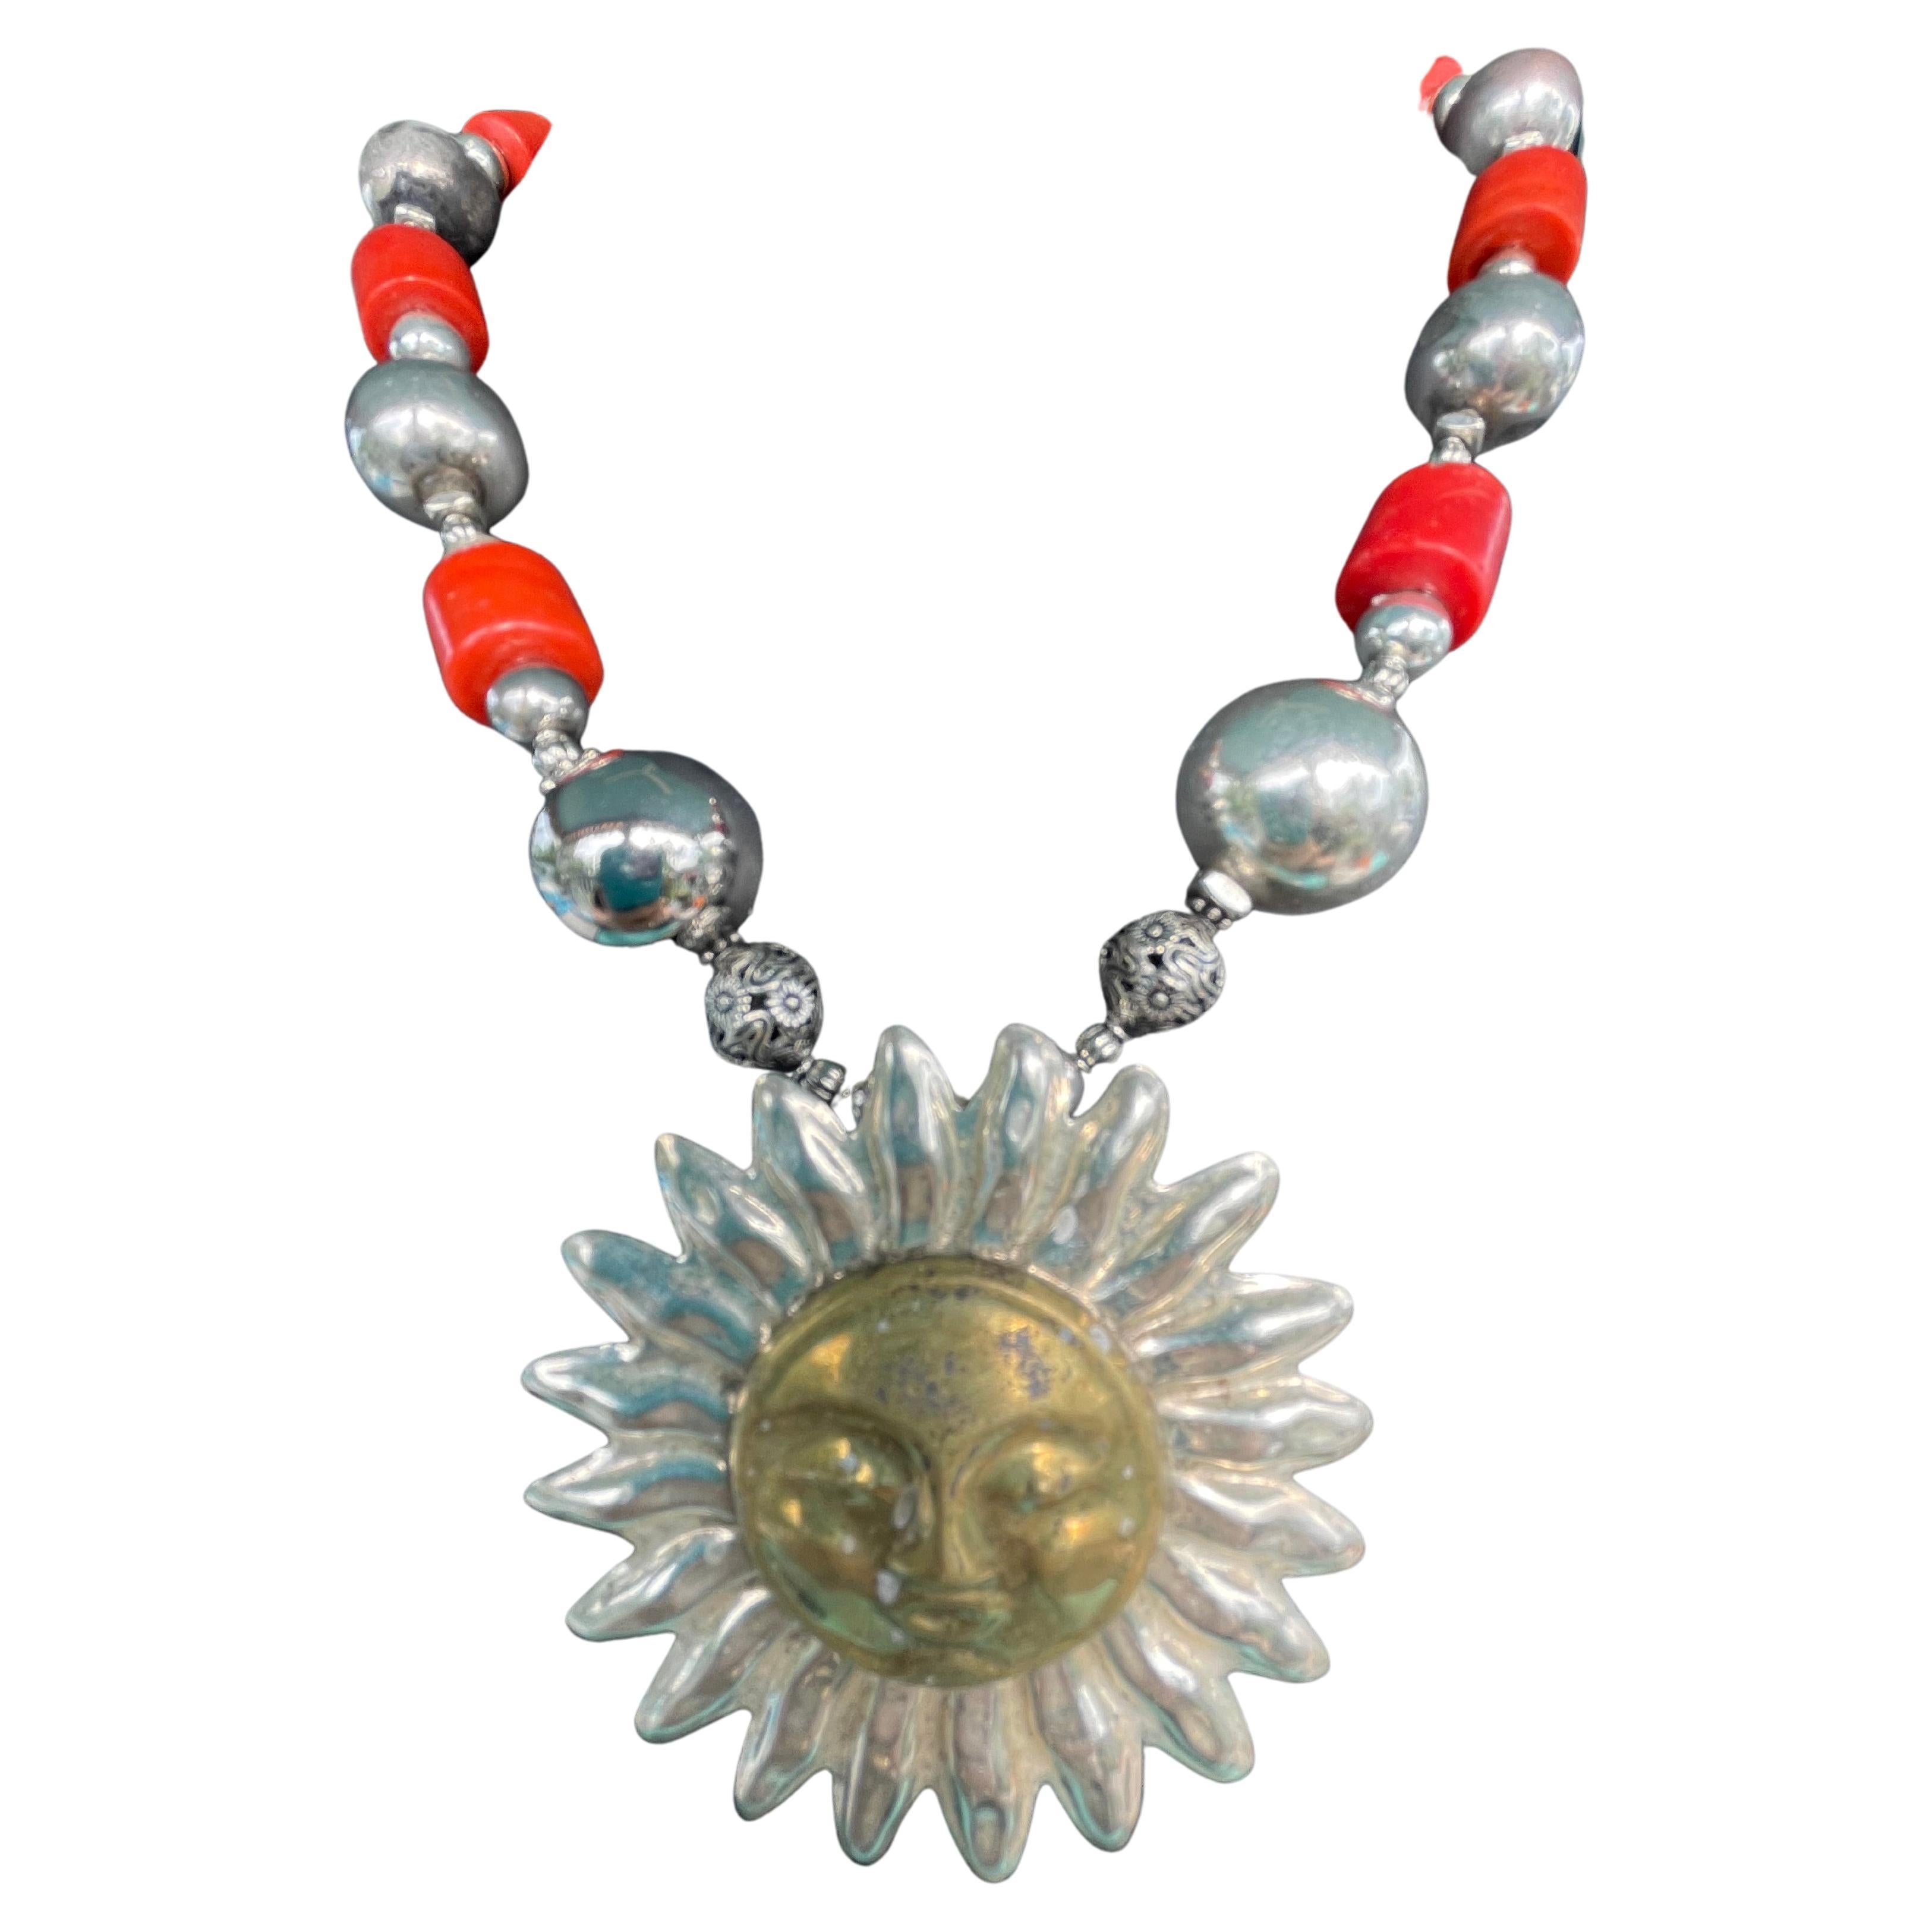 LB fabulous Mexican Sterling Sun Pendant necklace Coral and Sterling beads/clasp For Sale